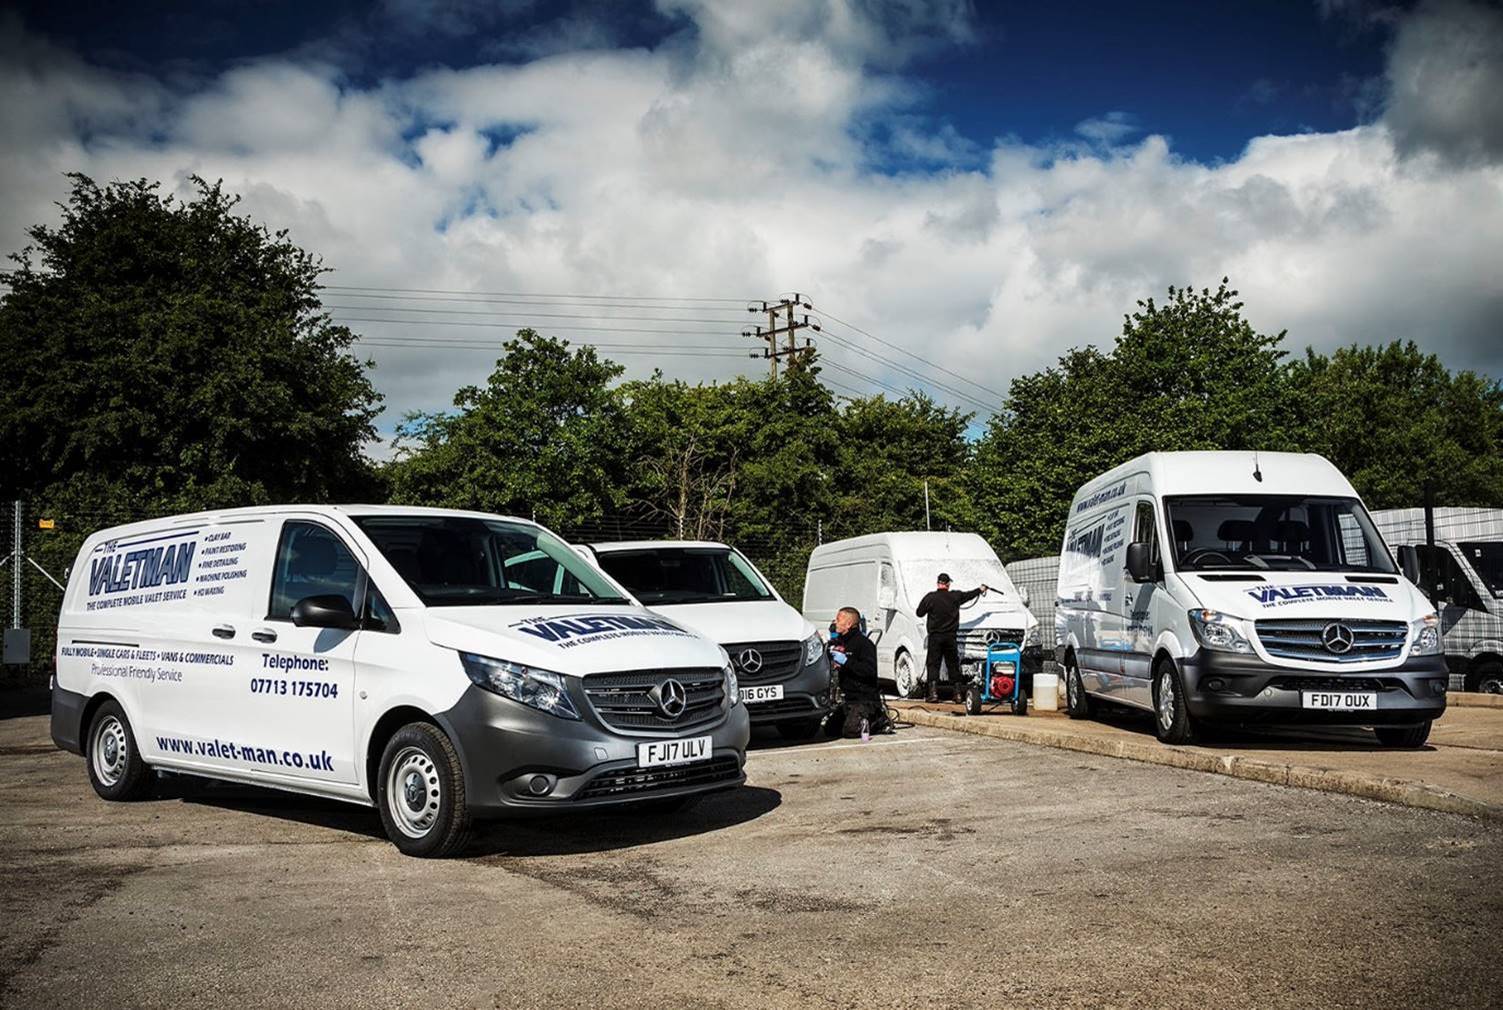 News from Mertrux Truck & Van - The Valet Man polishes up its act with new  Mercedes-Benz vans